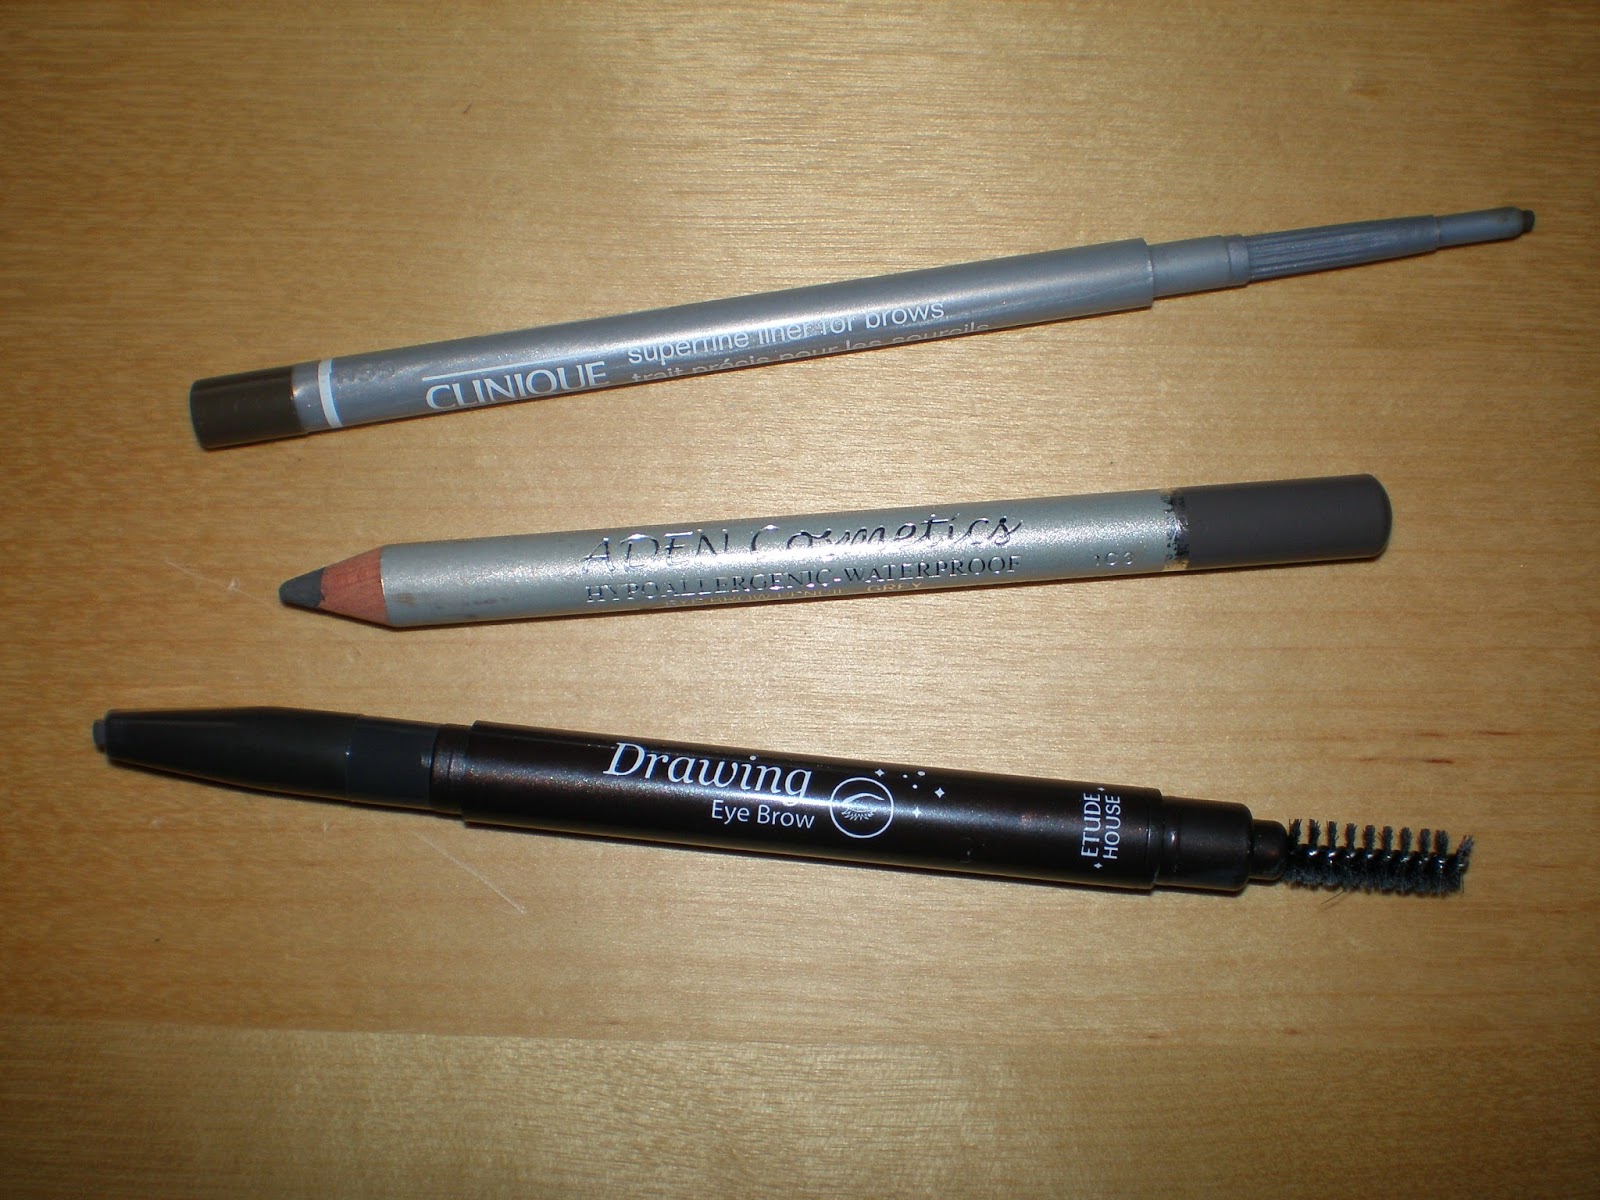 From top: Clinique Superfine liner for brows, Aden Cosmetics Eyebrow pencil,  Etude House Drawing Eye Brow Pencil